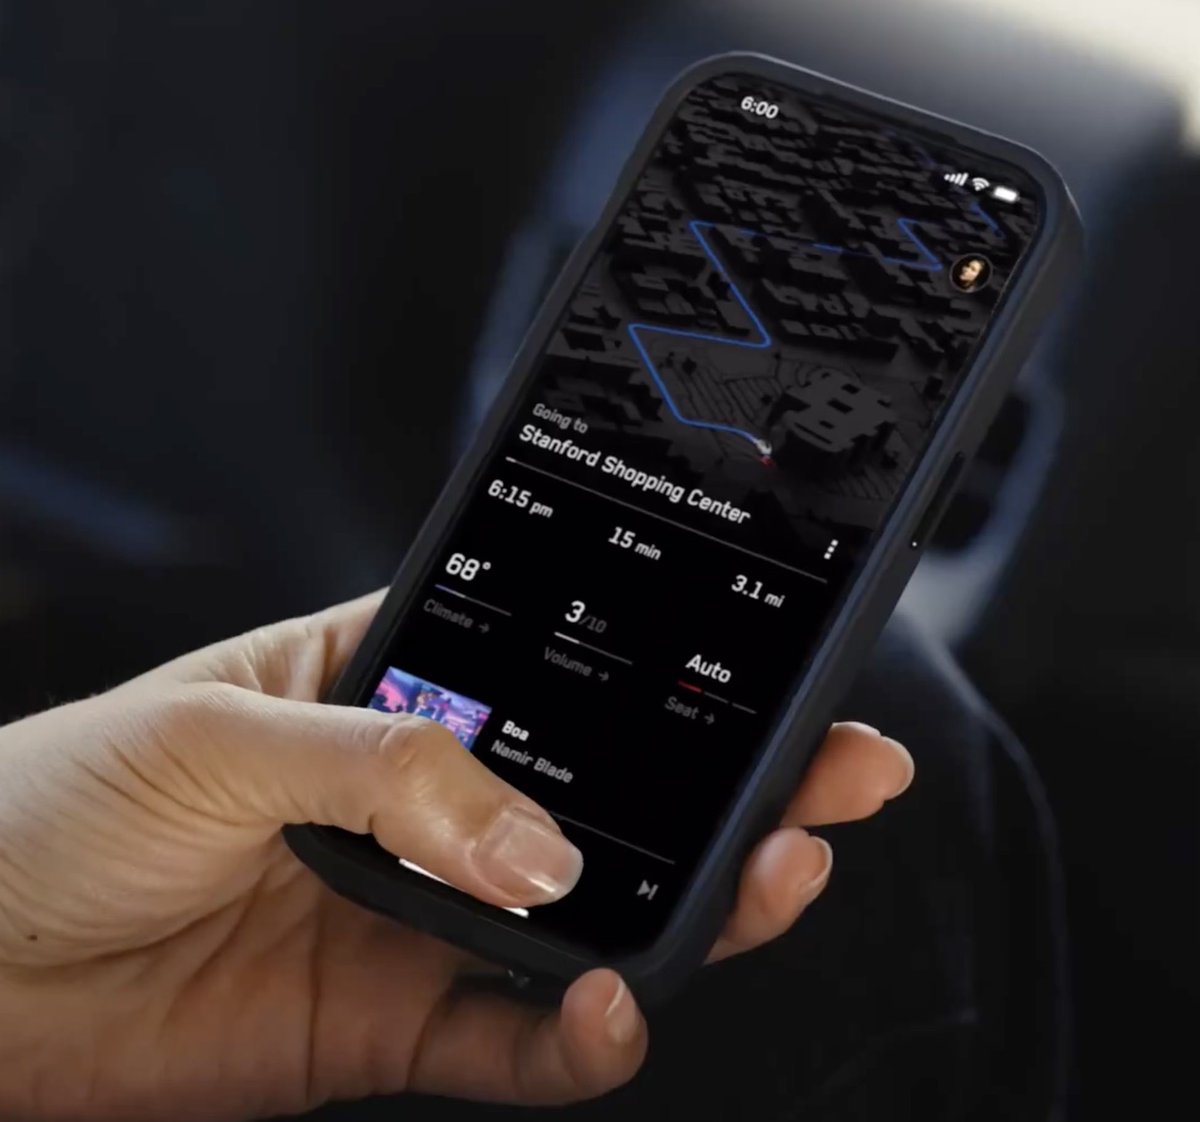 CYBERCABS ARE HEE-YA!

Glimpse of the Tesla rideshare app